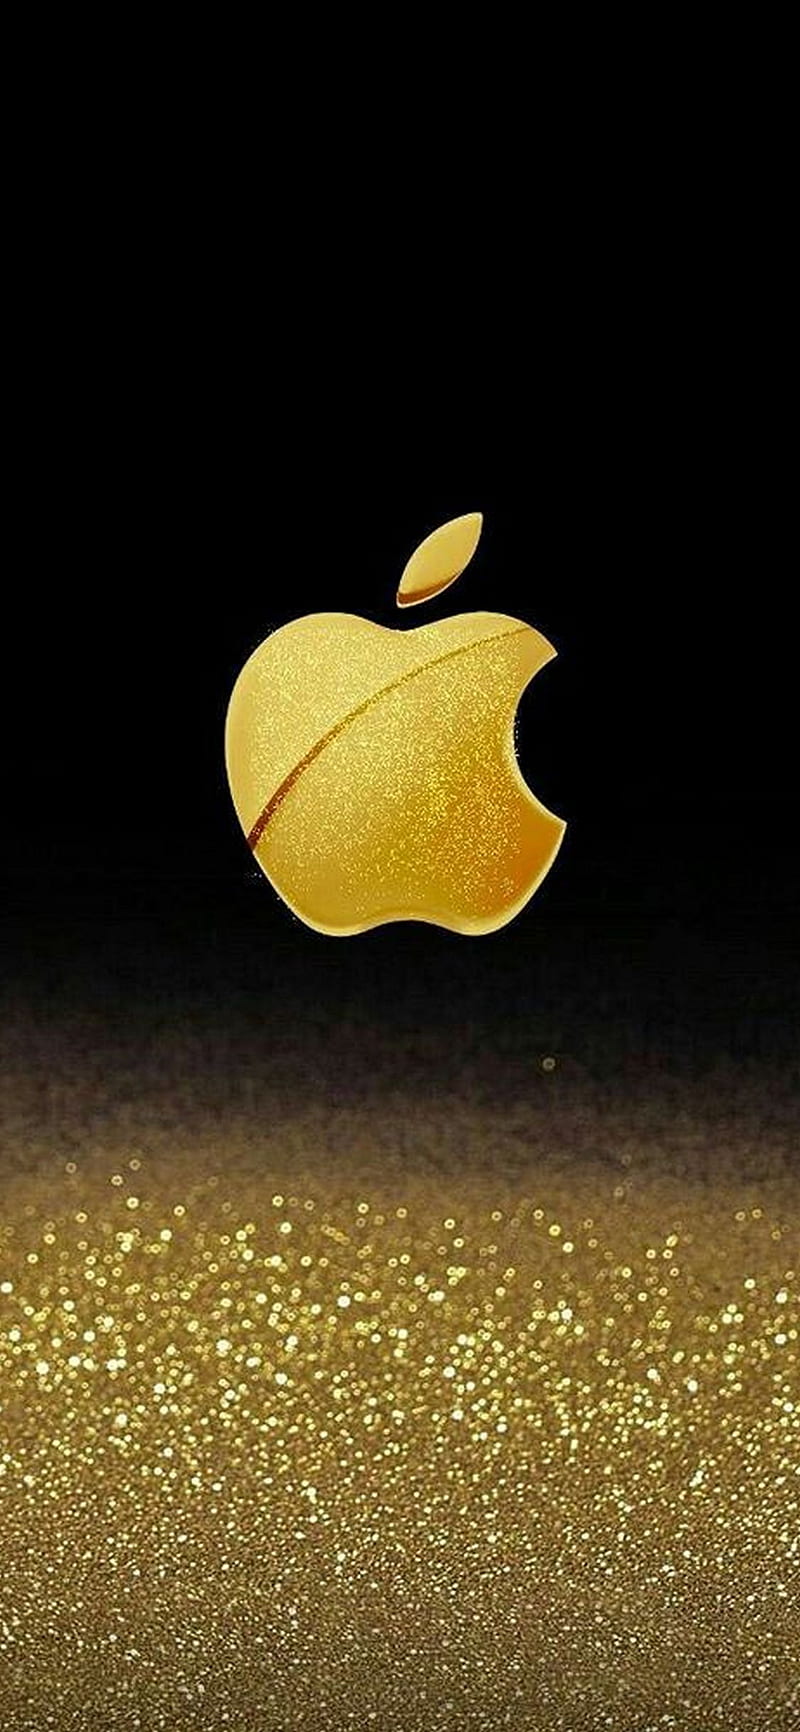 Gold Apple Apple Iphone 5s Hd Wallpapers Available For Free Download 46B |  Apple wallpaper, Apple logo wallpaper, Beauty iphone wallpaper